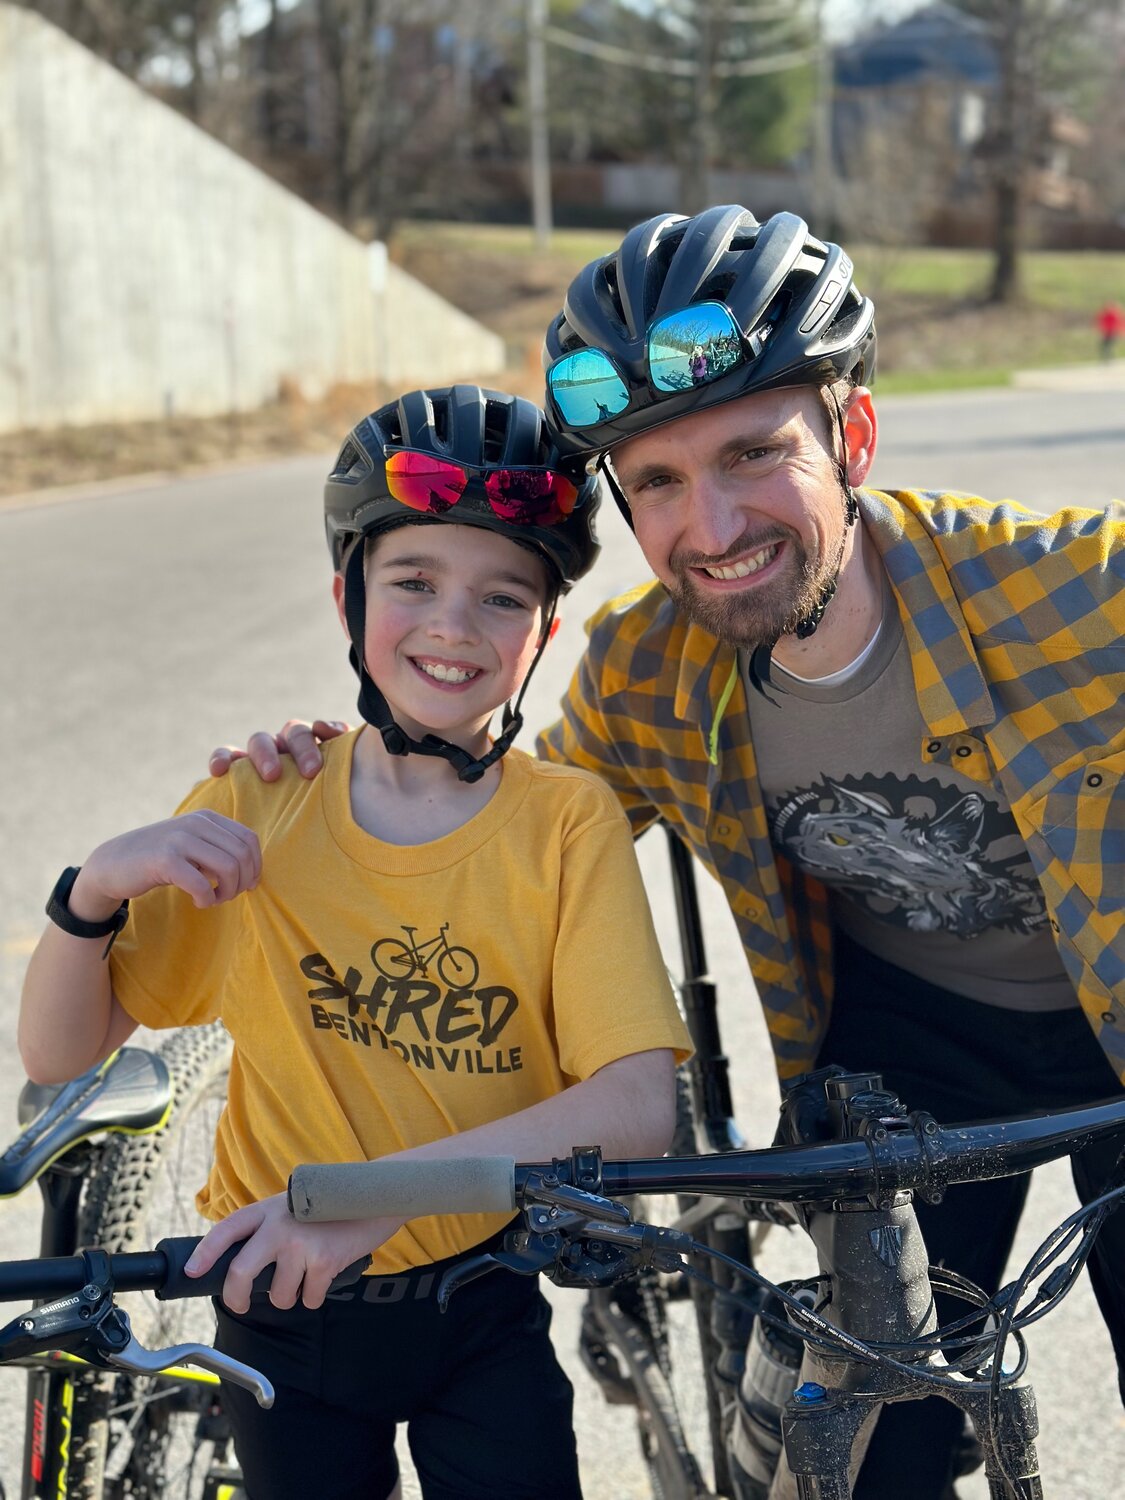 Attracting kids to cycling is one of race director Caleb Wilson’s (right) passions.  Son Paxton is ready to roll.